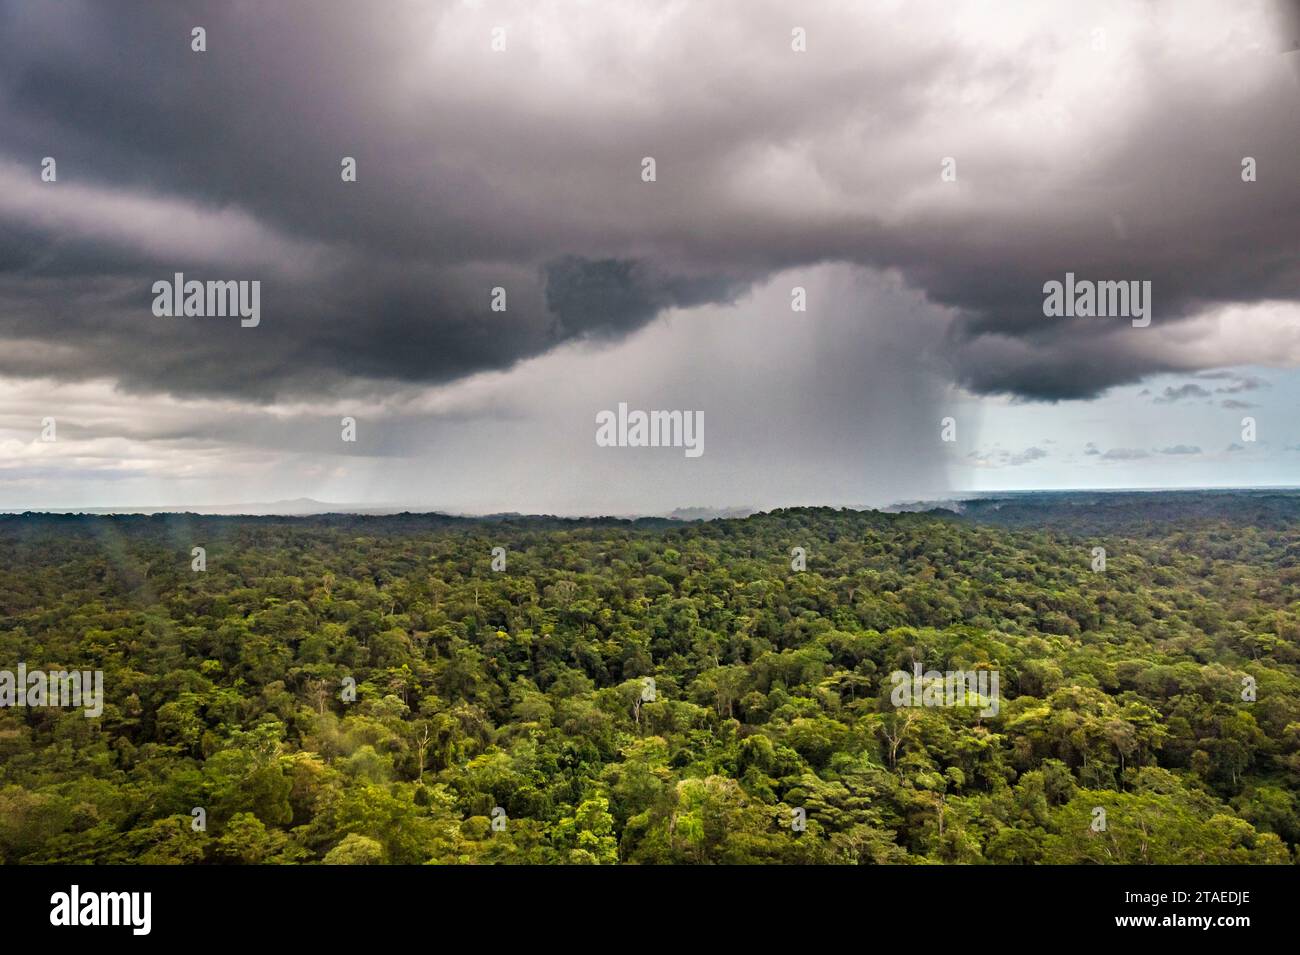 France, French Guiana, Apatou, Aerial view of the Amazon rainforest in a powerful tropical downpour (aerial view) Stock Photo